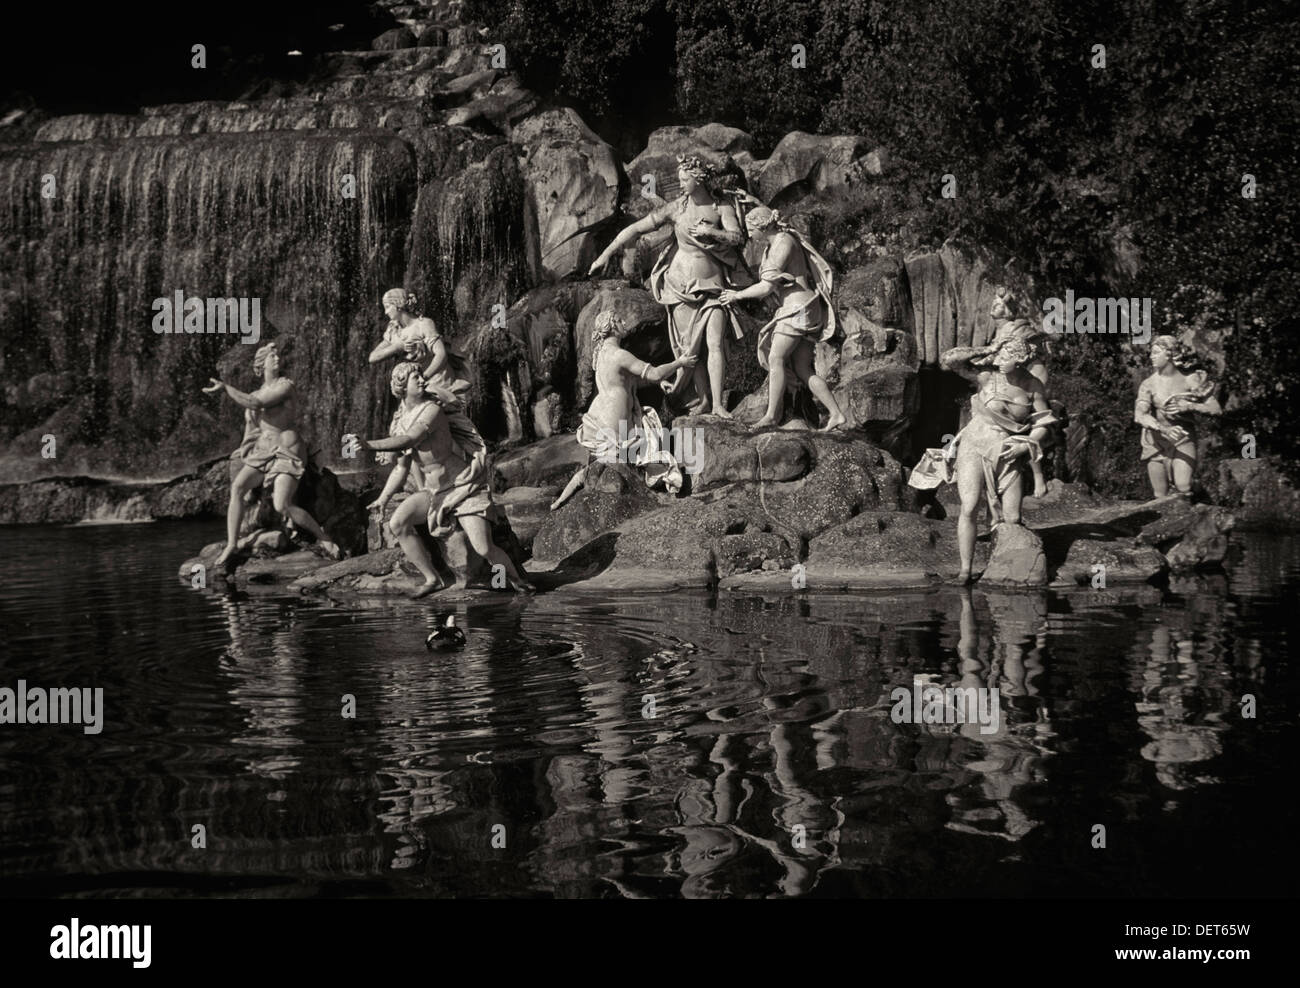 Fountain of Diana and Actaeon in the park of the Royal Palace at Caserta (sculpture by Paolo Persico, Brunelli, Pietro Solari) Stock Photo